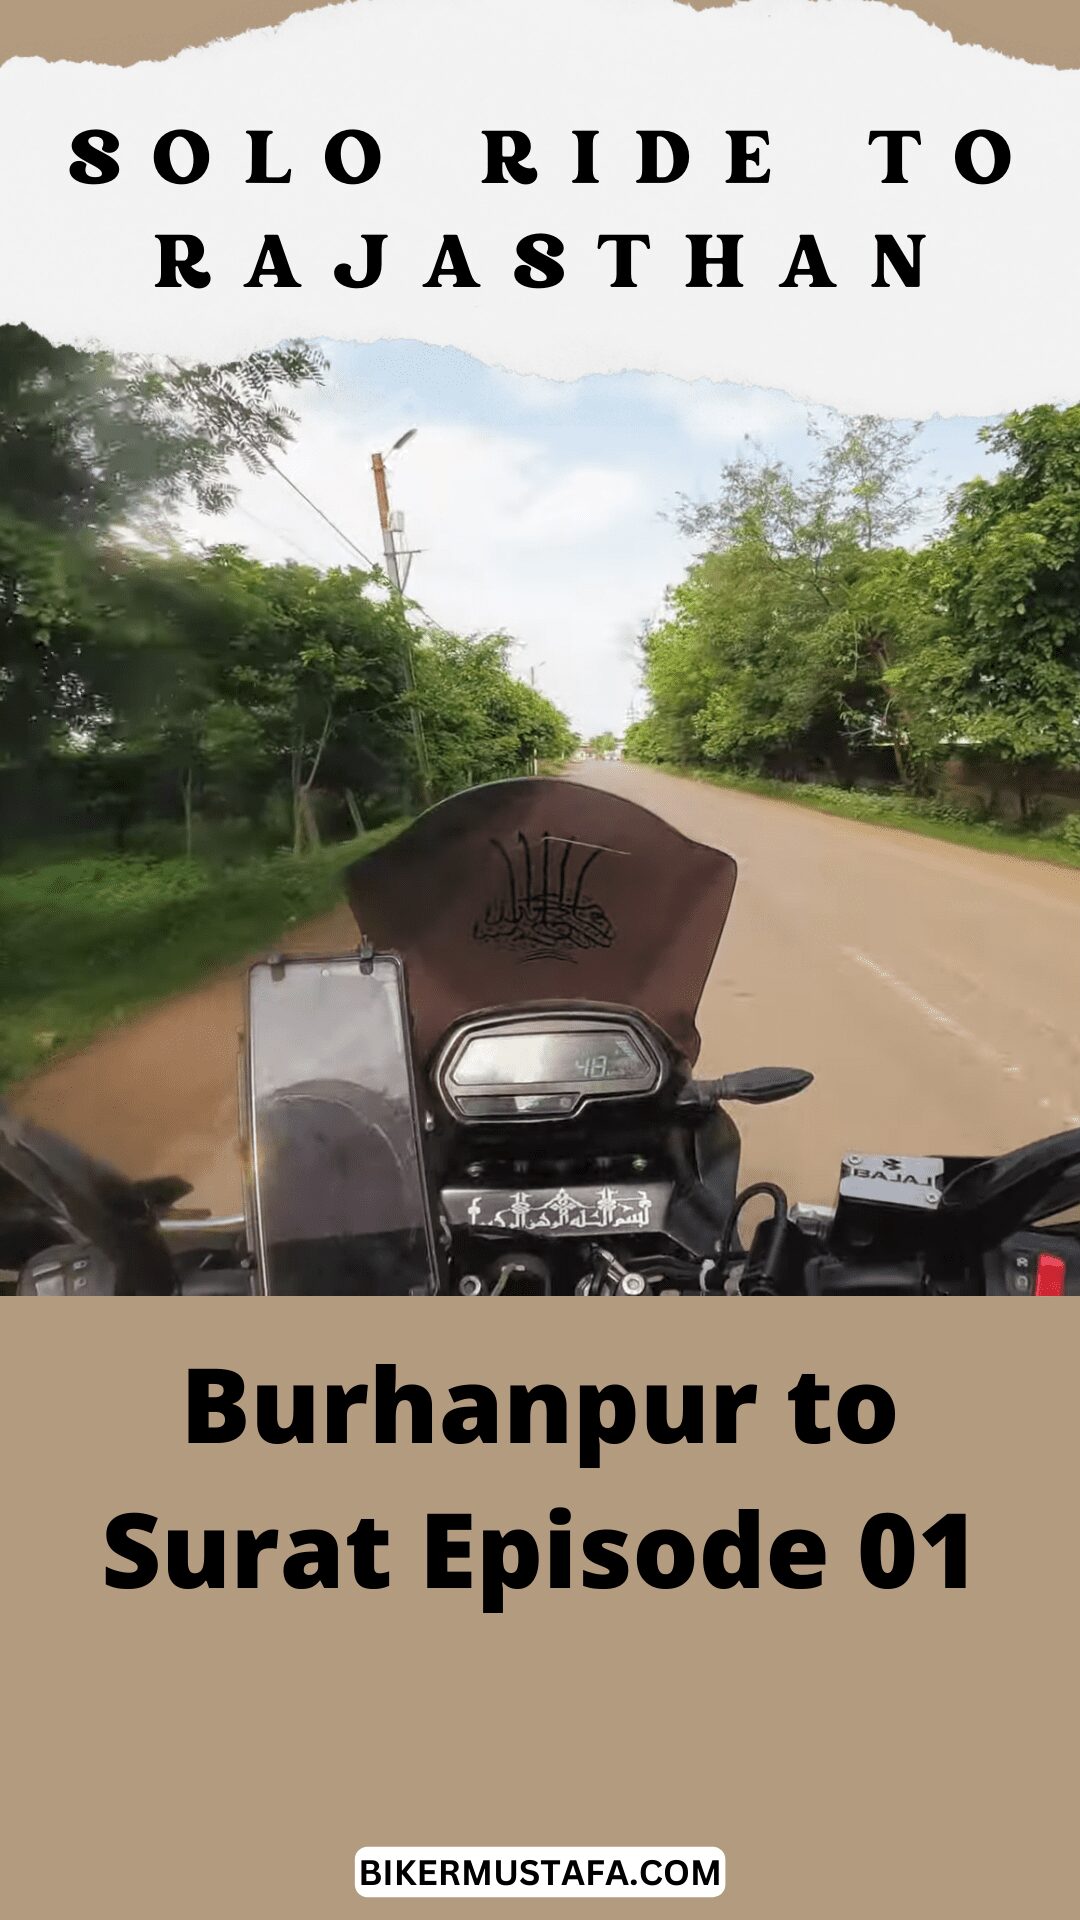 Solo Ride to Rajasthan Burhanpur to Surat Episode 01